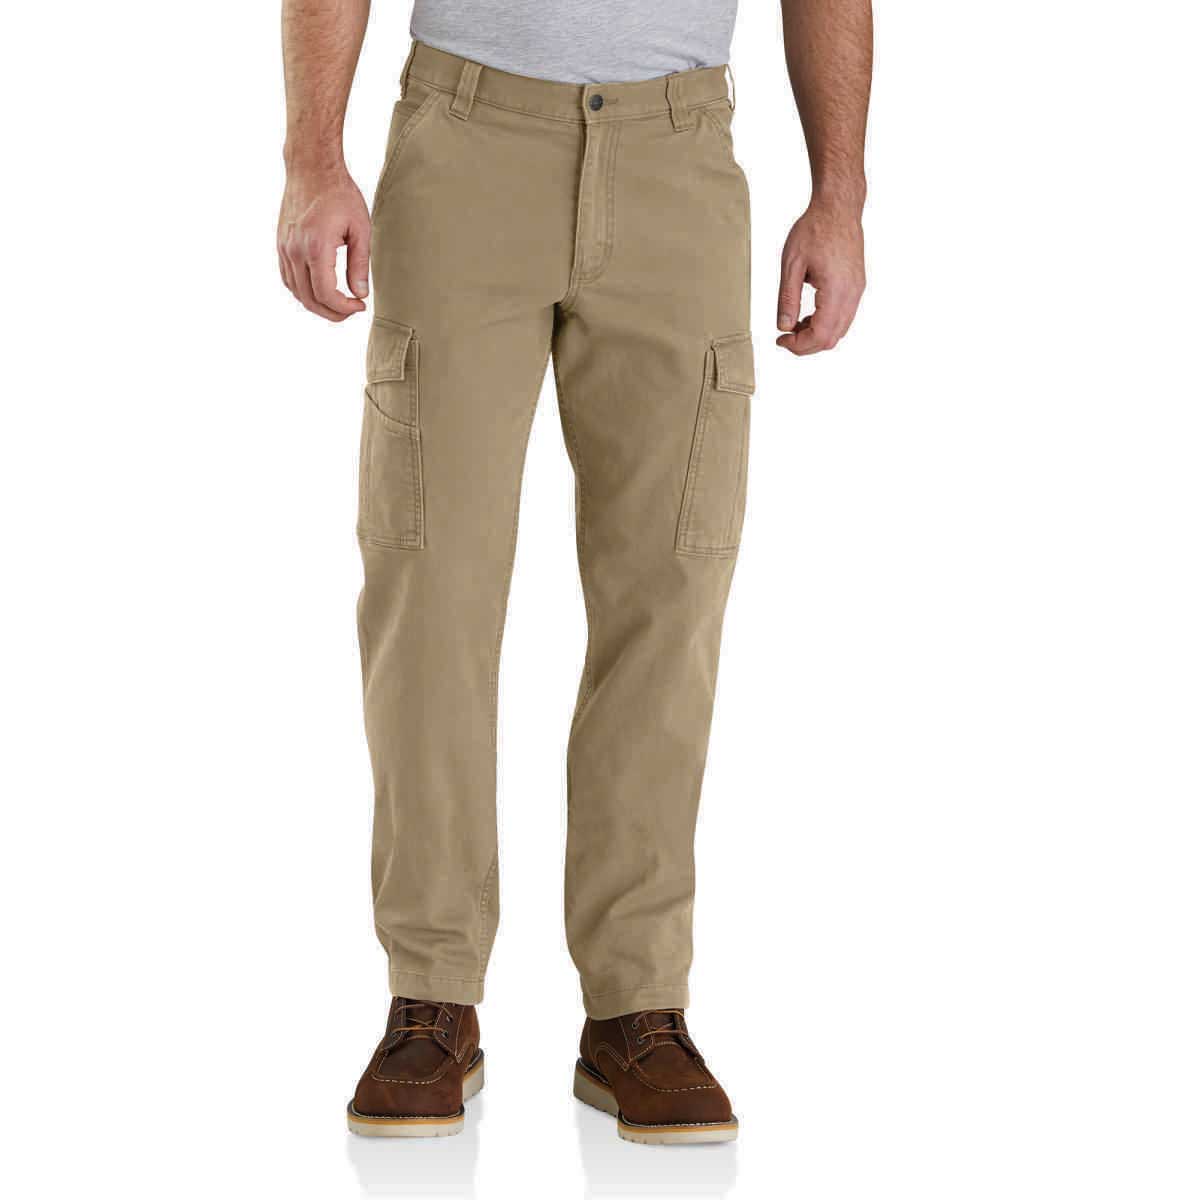  Carhartt Mens Big & Tall Rugged Flex Relaxed Fit Duck  Utility Work Pant